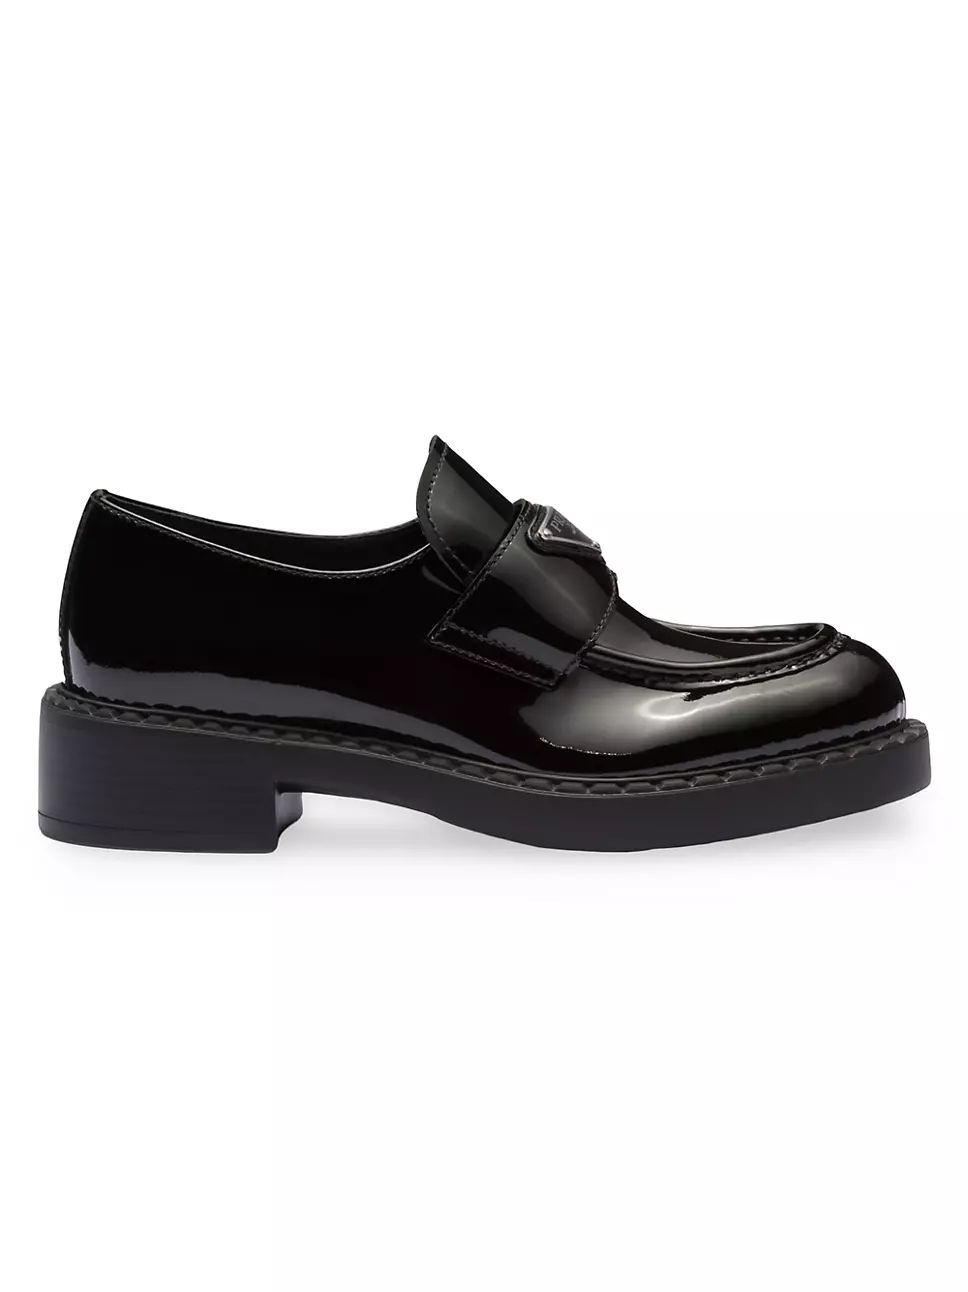 Chocolate Patent Leather Loafers | Saks Fifth Avenue